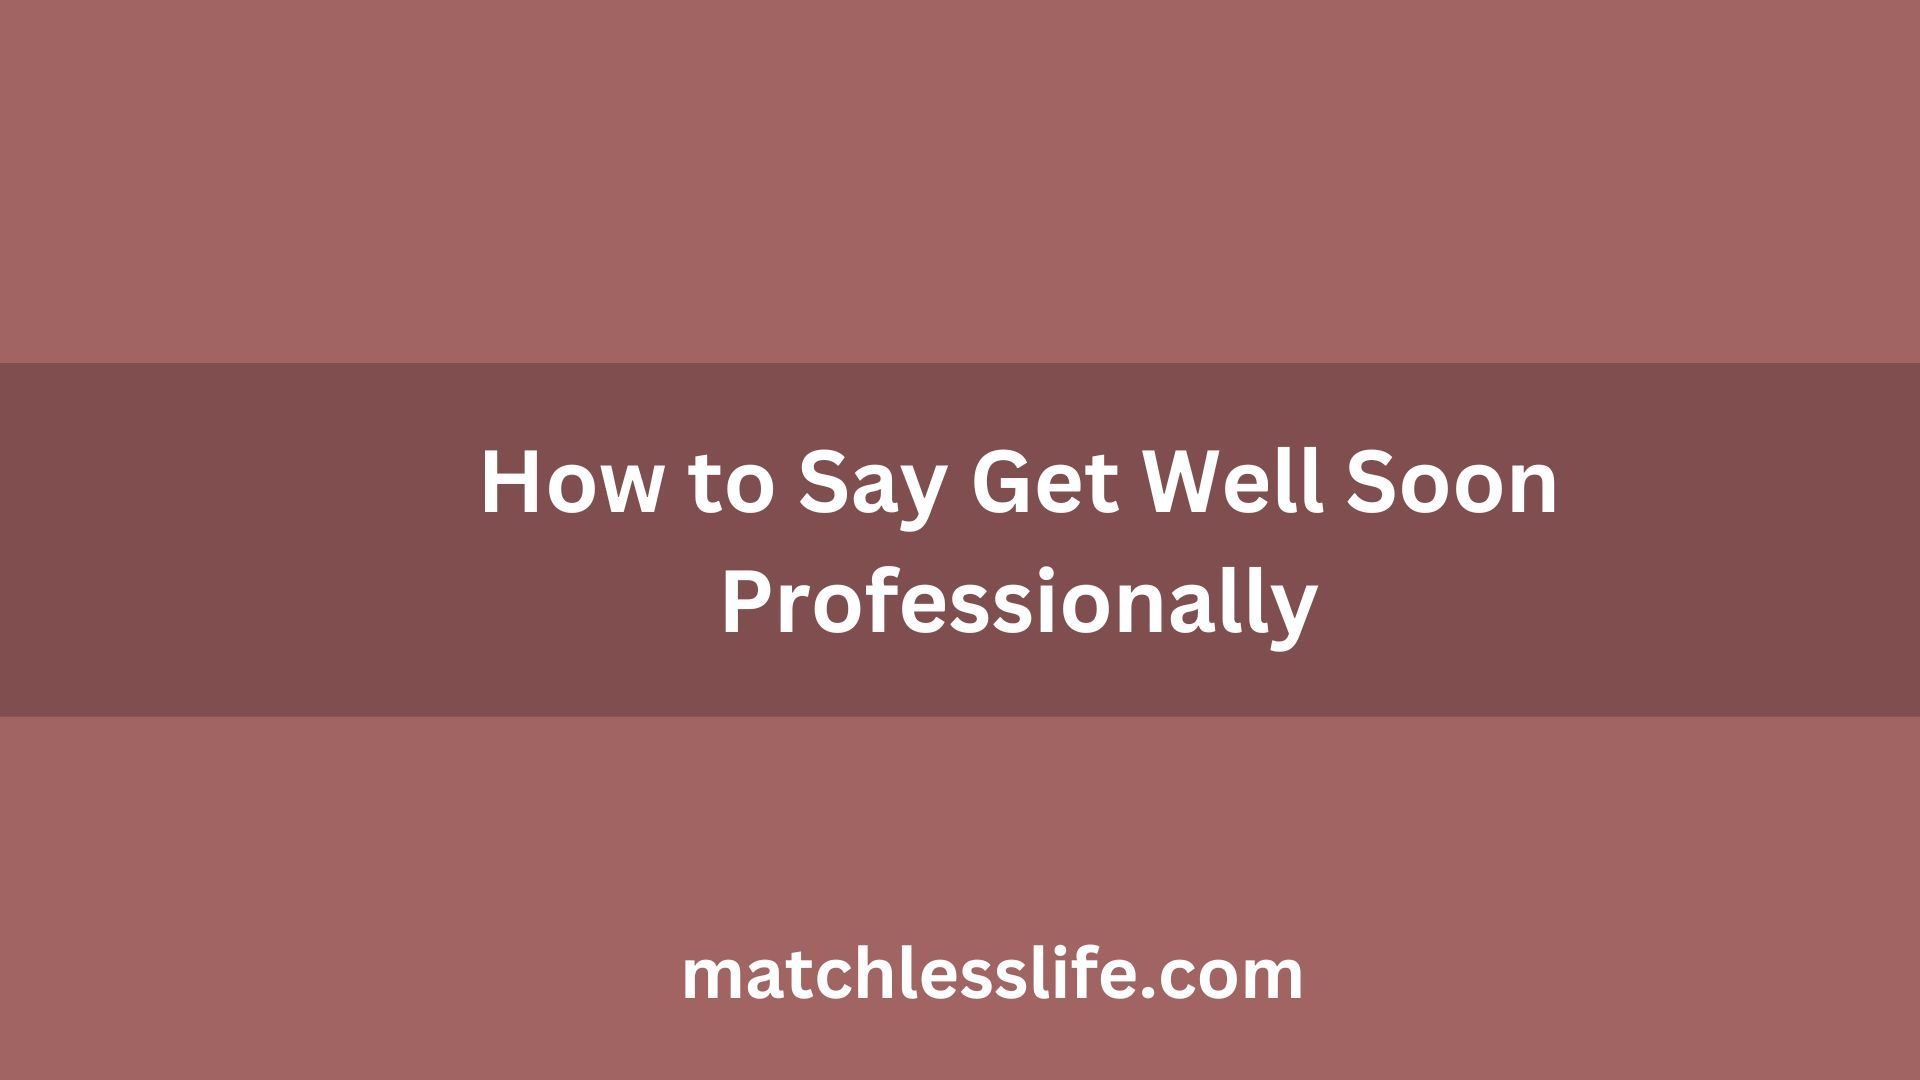 How to Say Get Well Soon Professionally